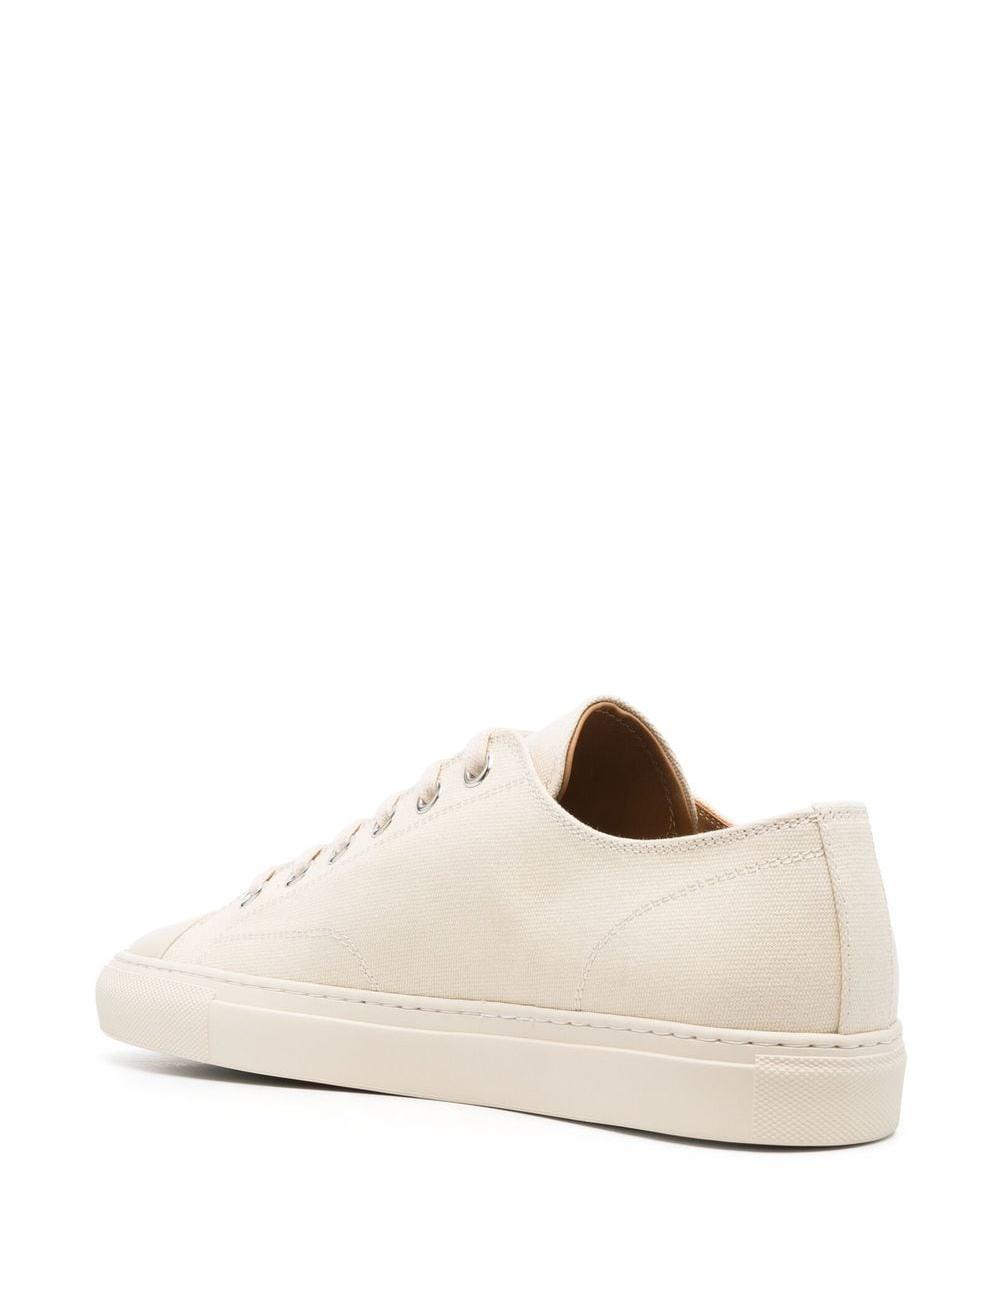 Tournament low-top canvas sneakers